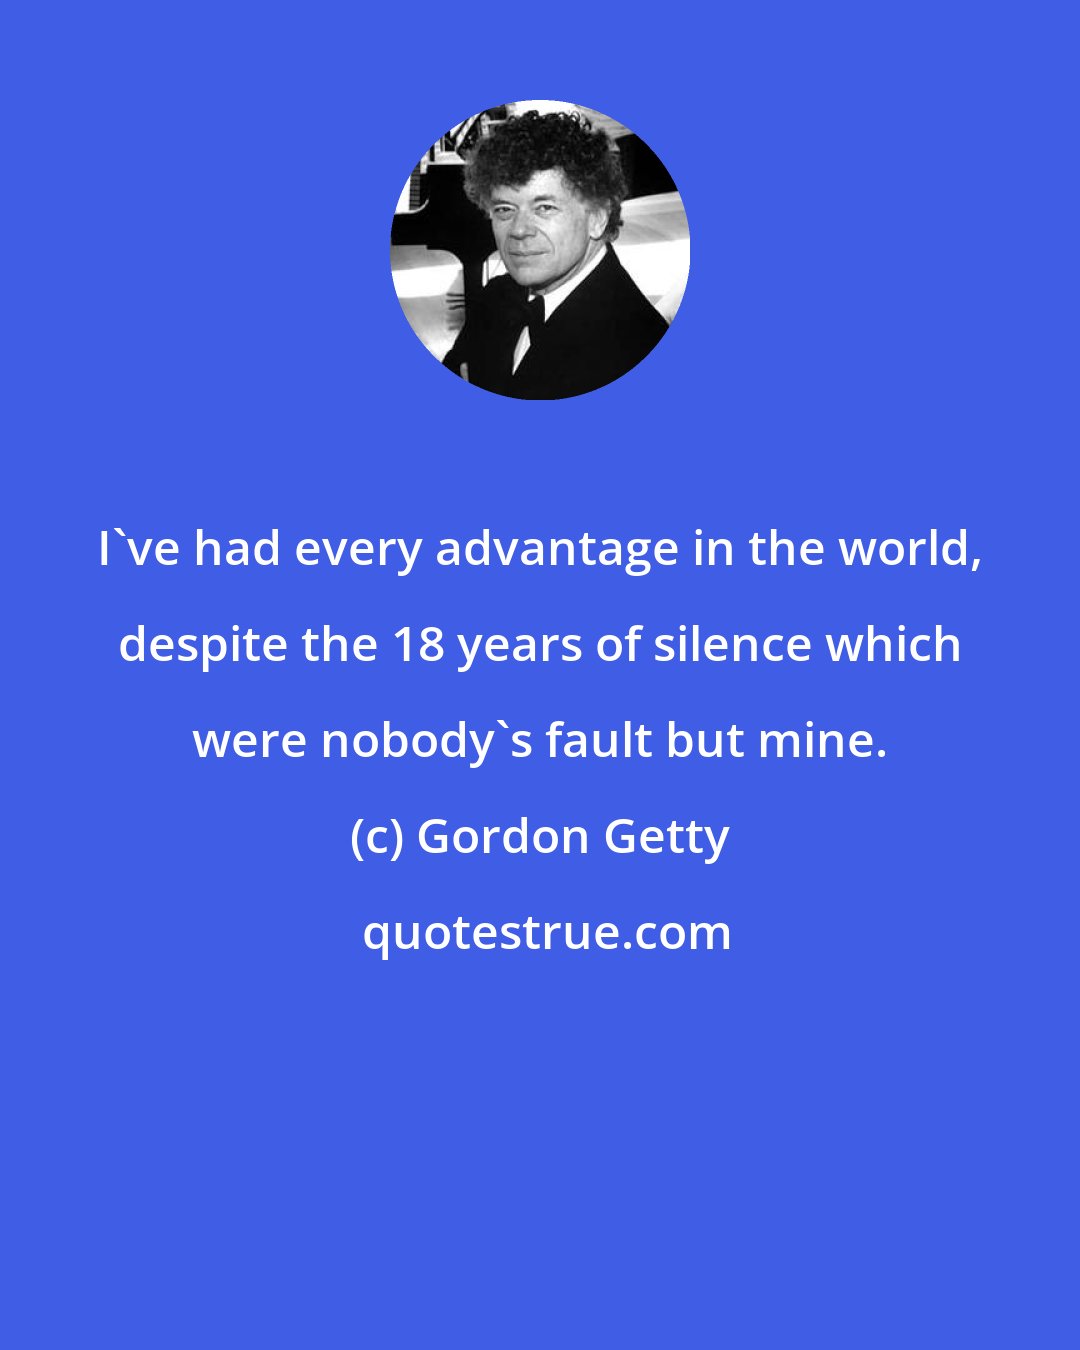 Gordon Getty: I've had every advantage in the world, despite the 18 years of silence which were nobody's fault but mine.